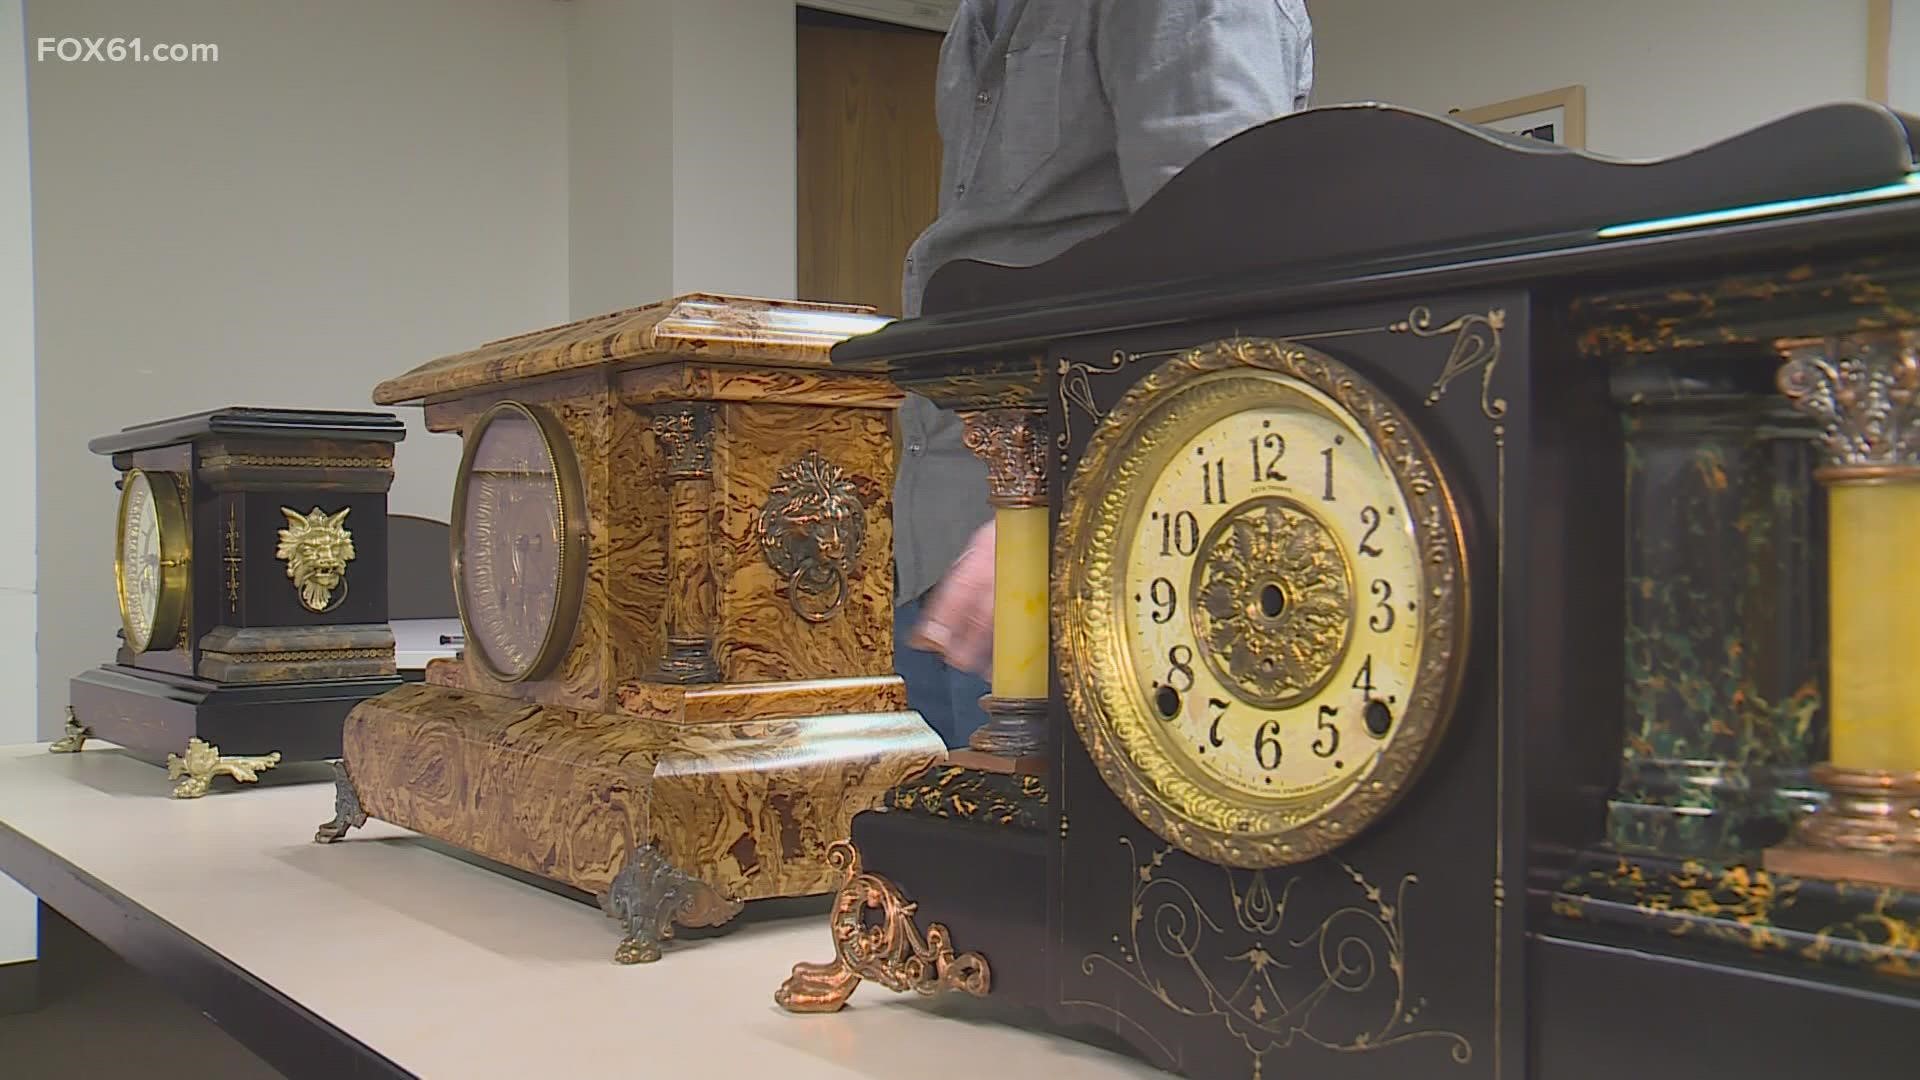 Gage Robertson has been repairing century-old clocks for the past three years.